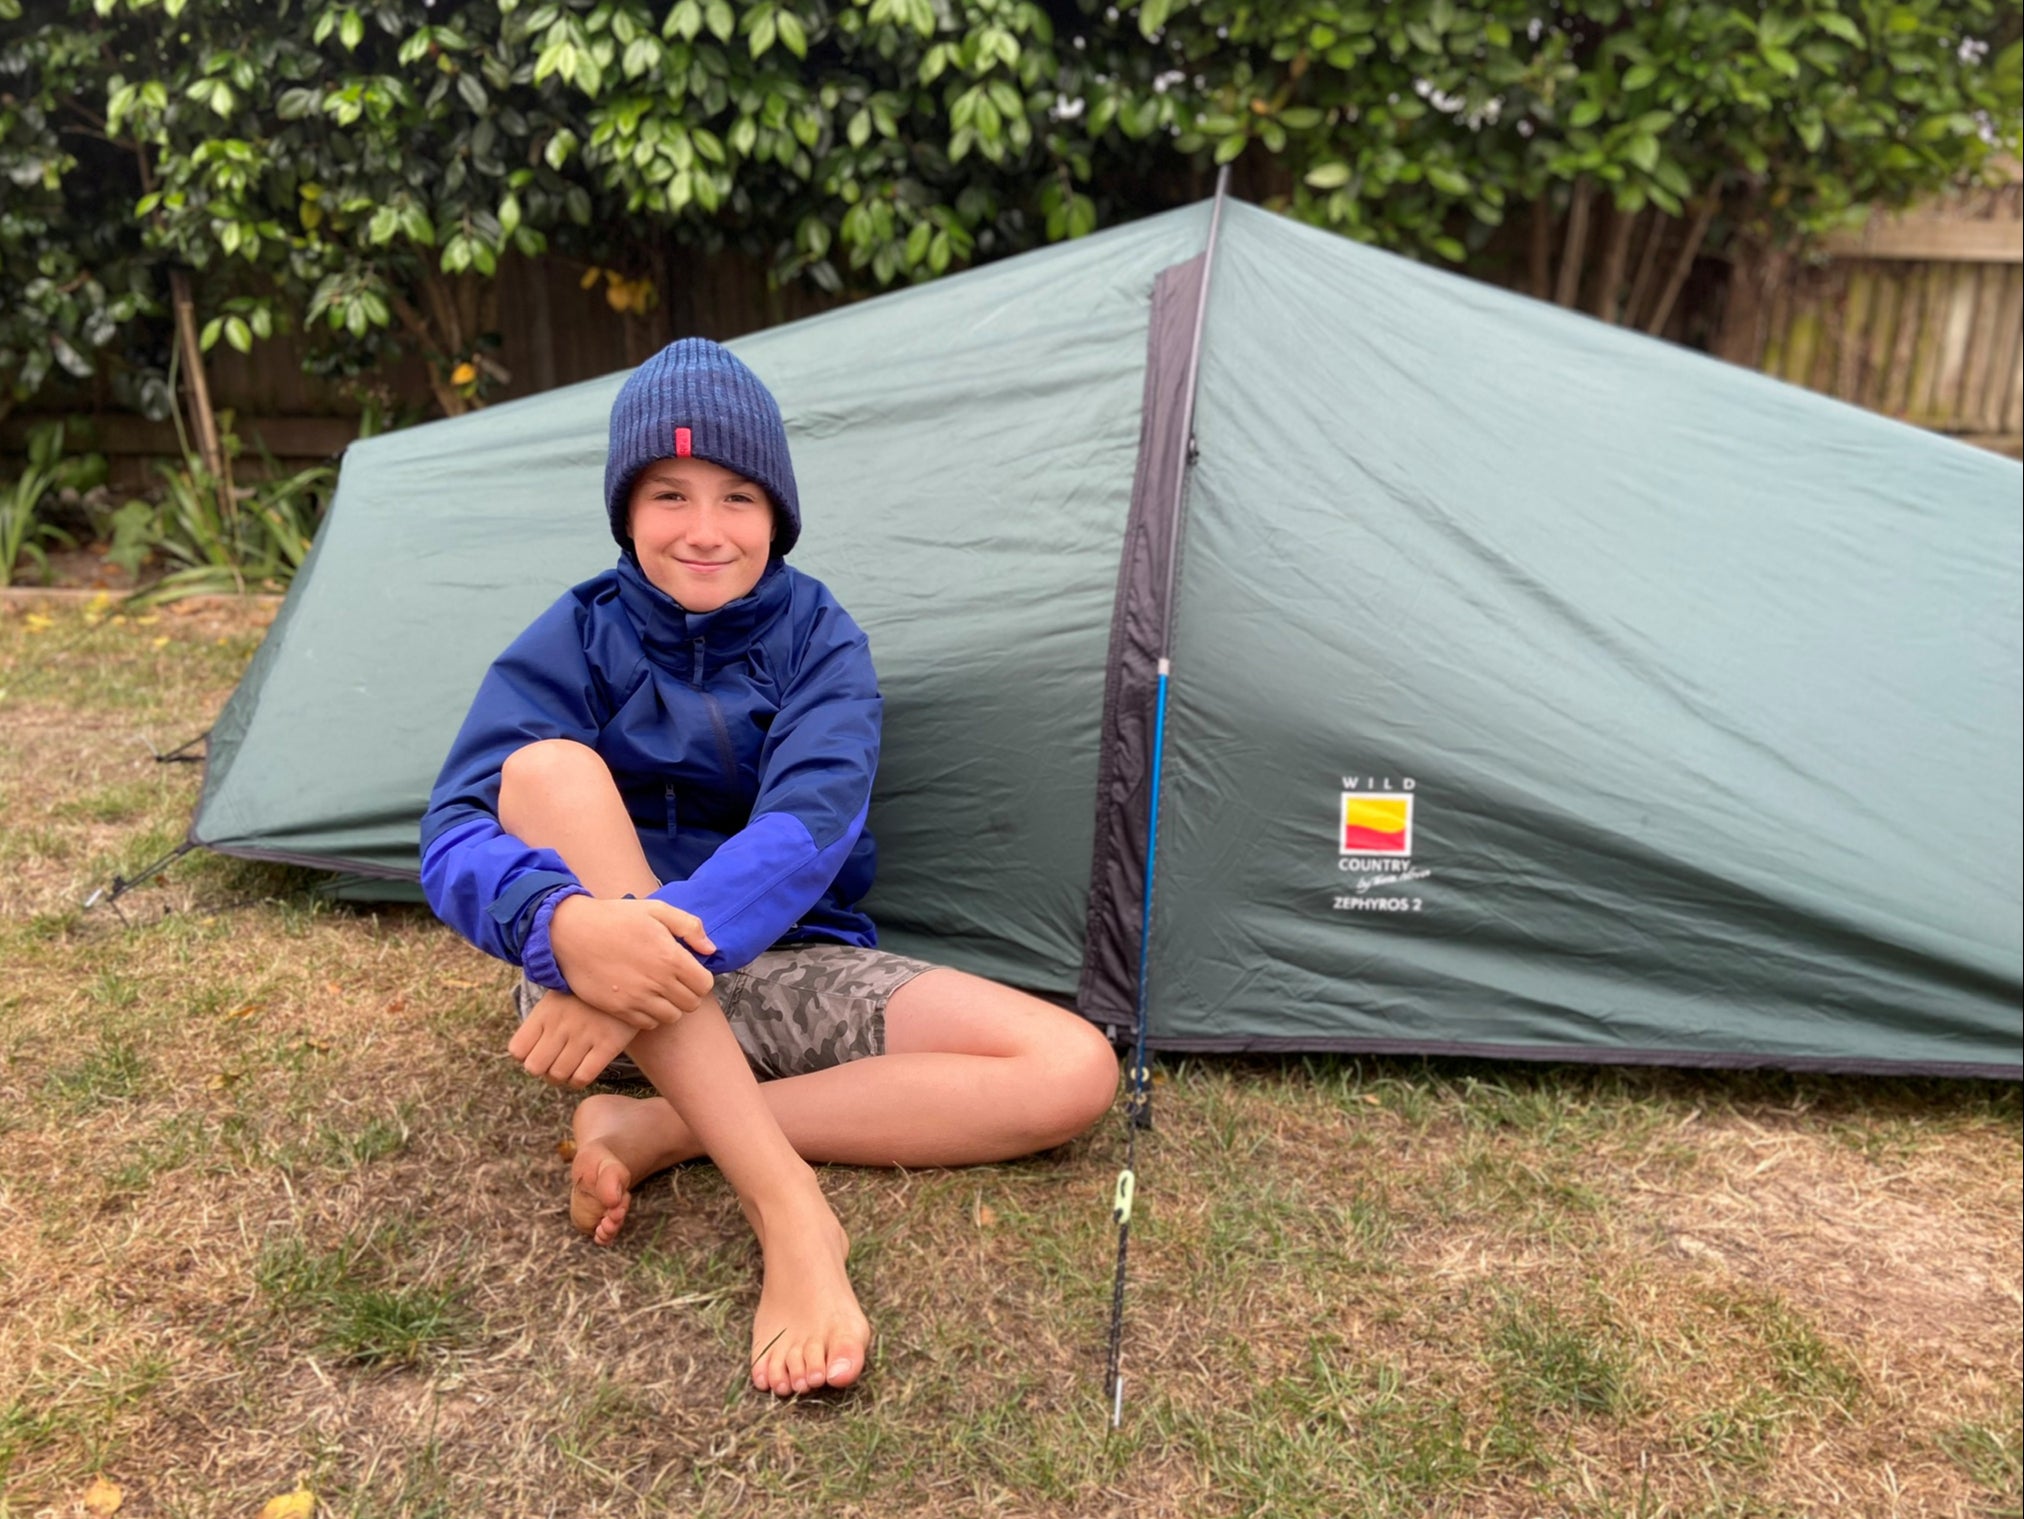 Max Woosey has been camping in his garden since March 2020